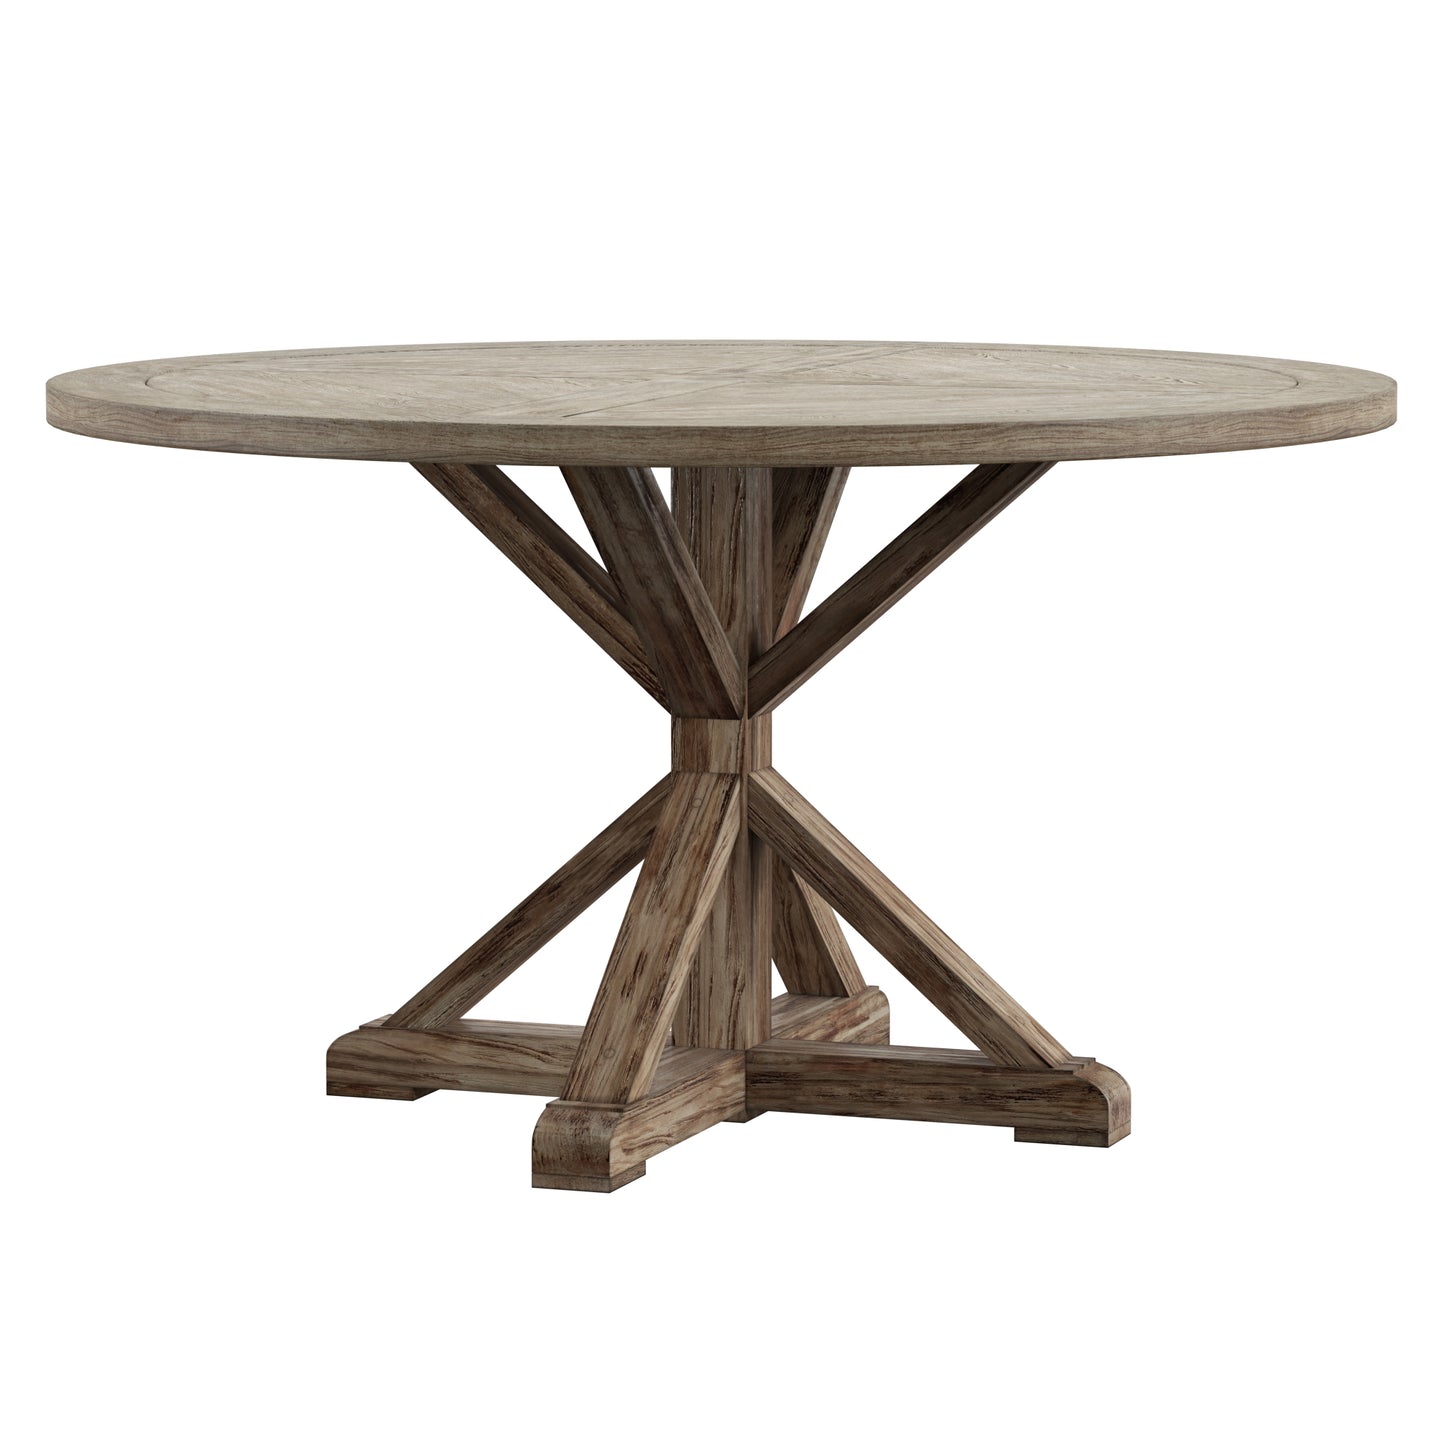 Rustic X-Base Round Pine Wood Dining Table - Antique Grey Finish, 54-inch